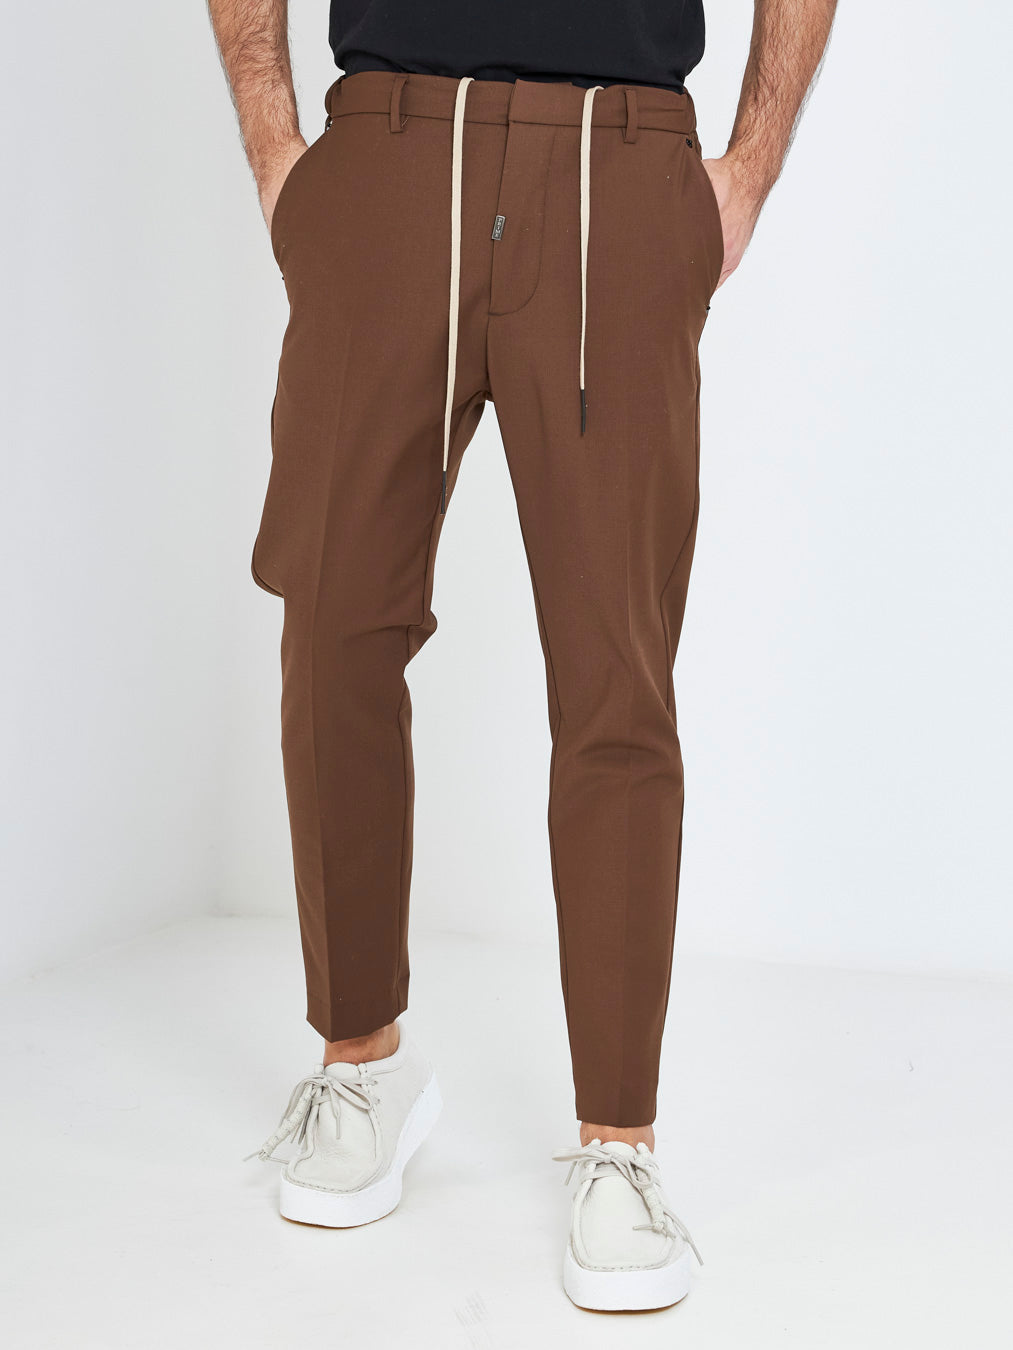 First brown pants